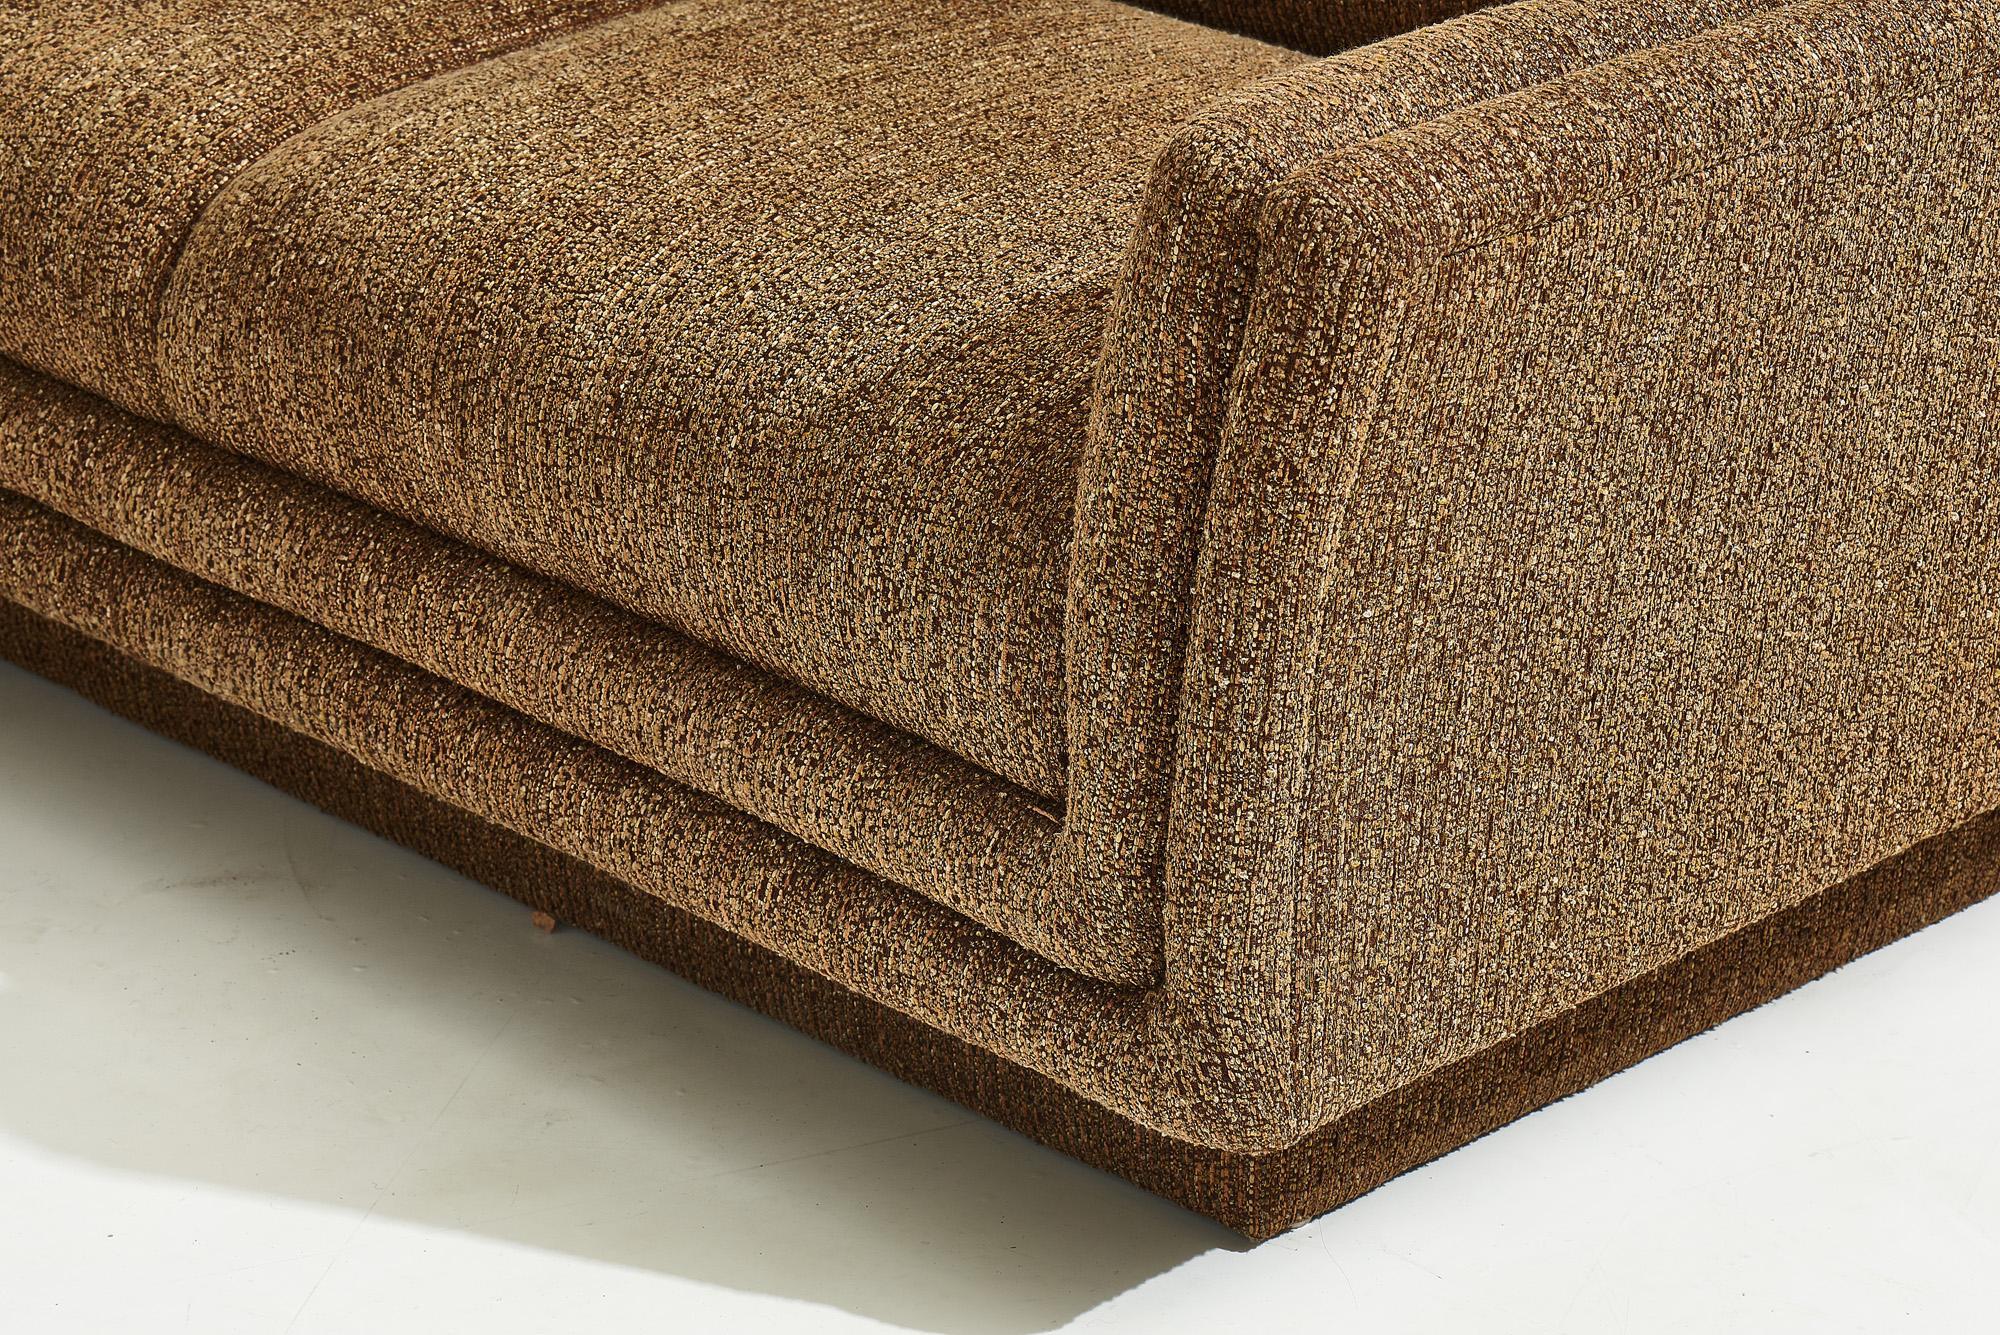 Weiman/Preview boucle upholstery, circa 1970. Original with brown boucle fabric.

